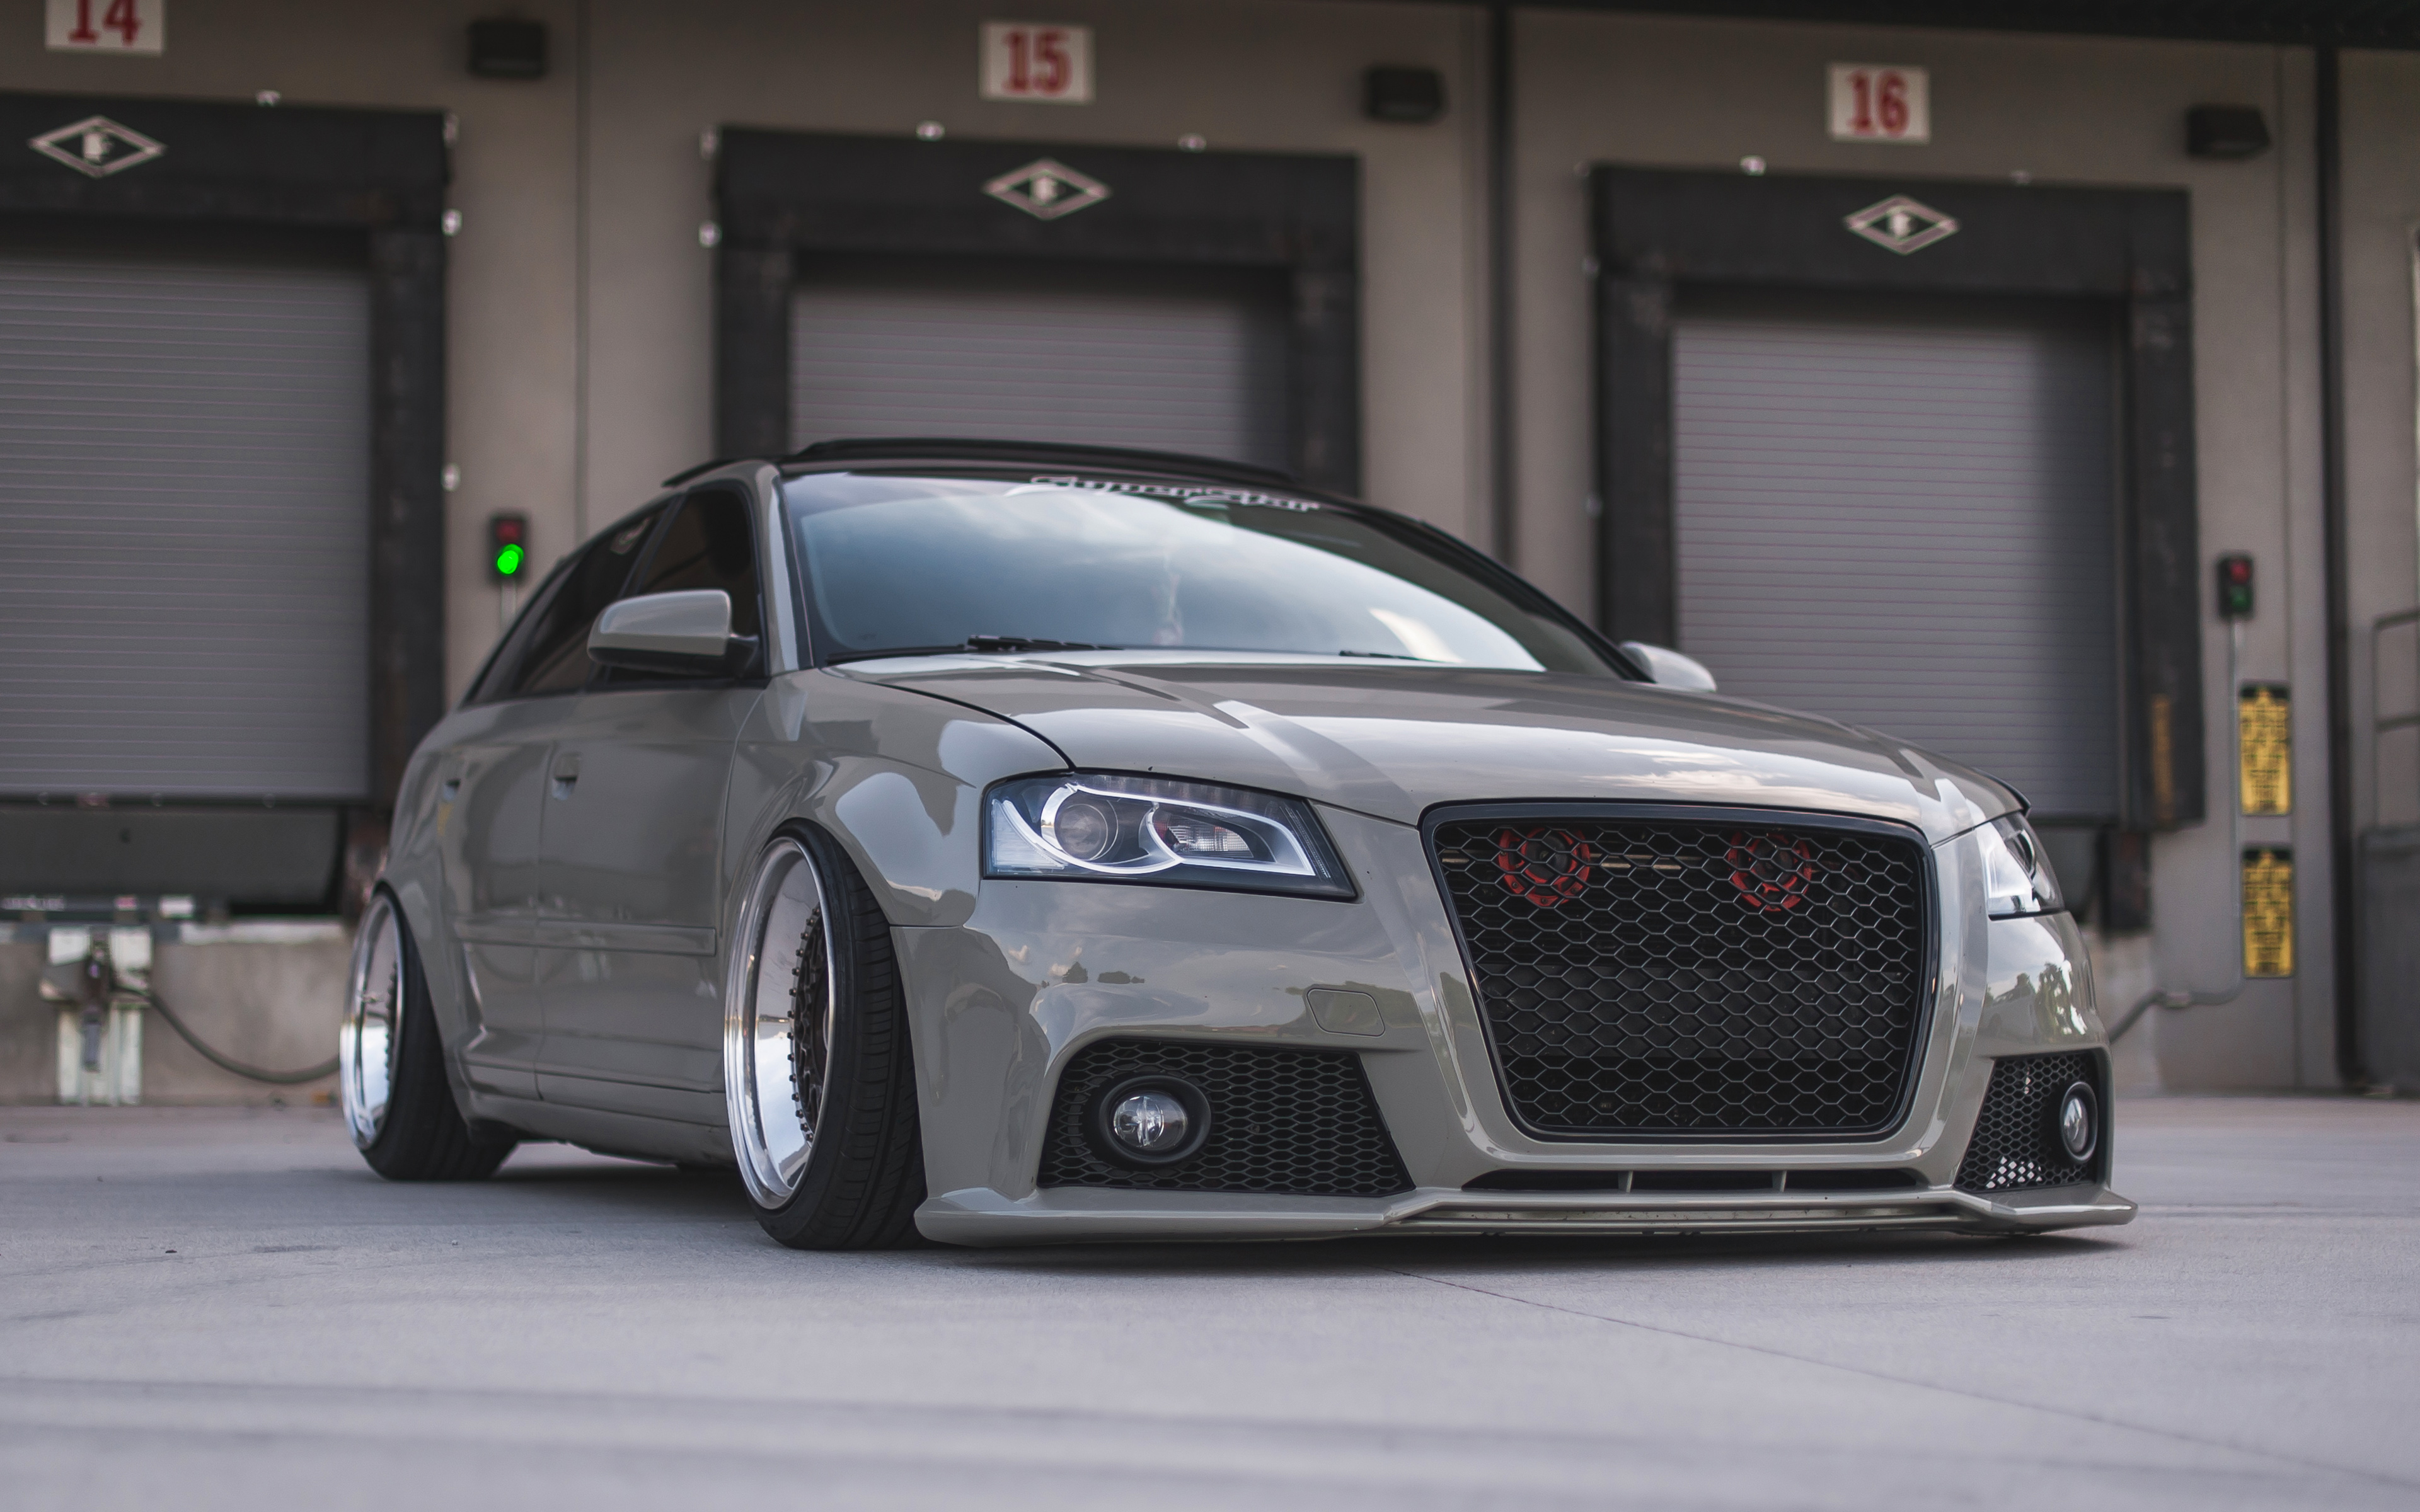 Audi A3 Sportback, Tuning, Bbs Rs Wheels, Stance, Tuning - Audi A3 Sportback Tuning - HD Wallpaper 